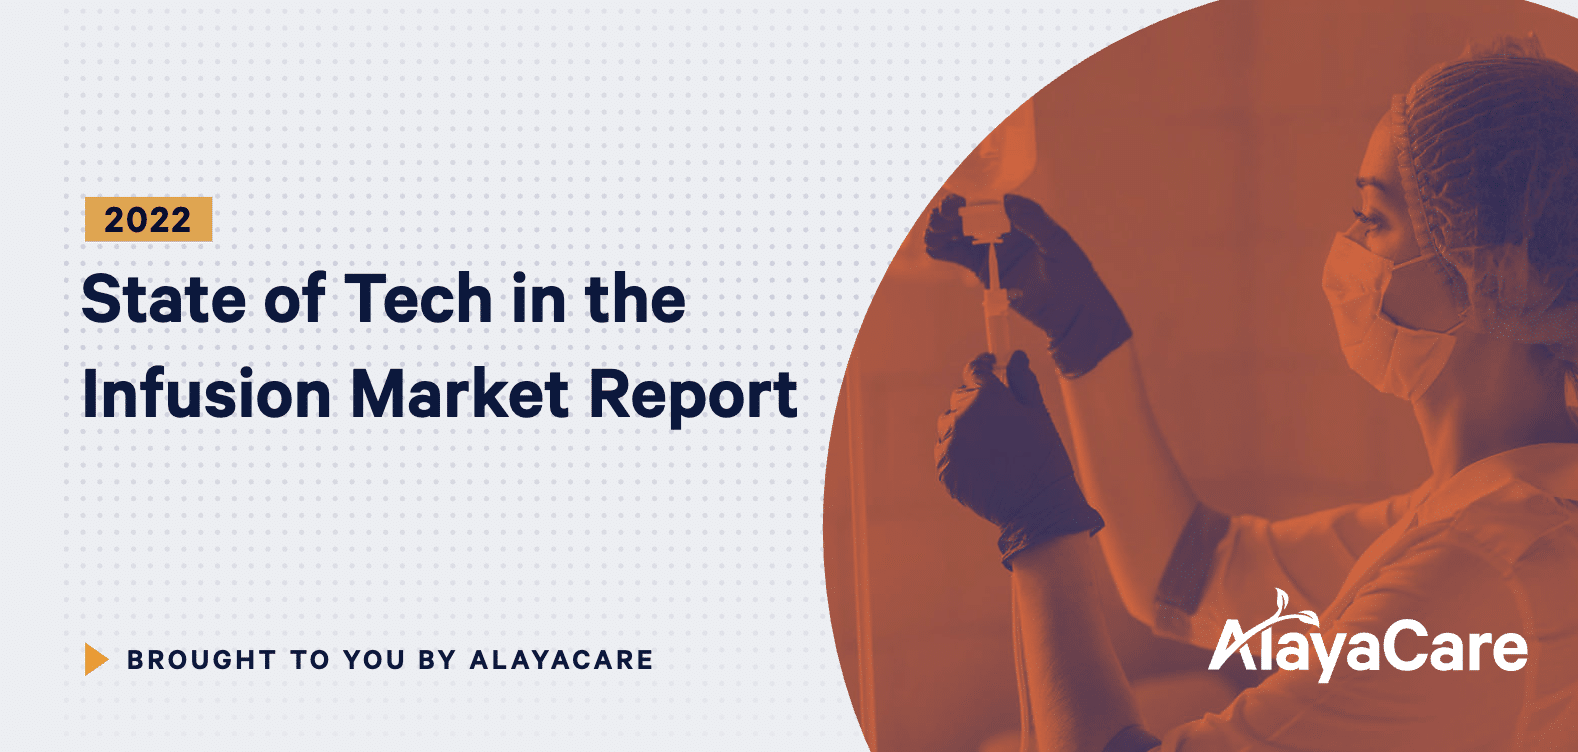 State of Tech in the Infusion Market Report